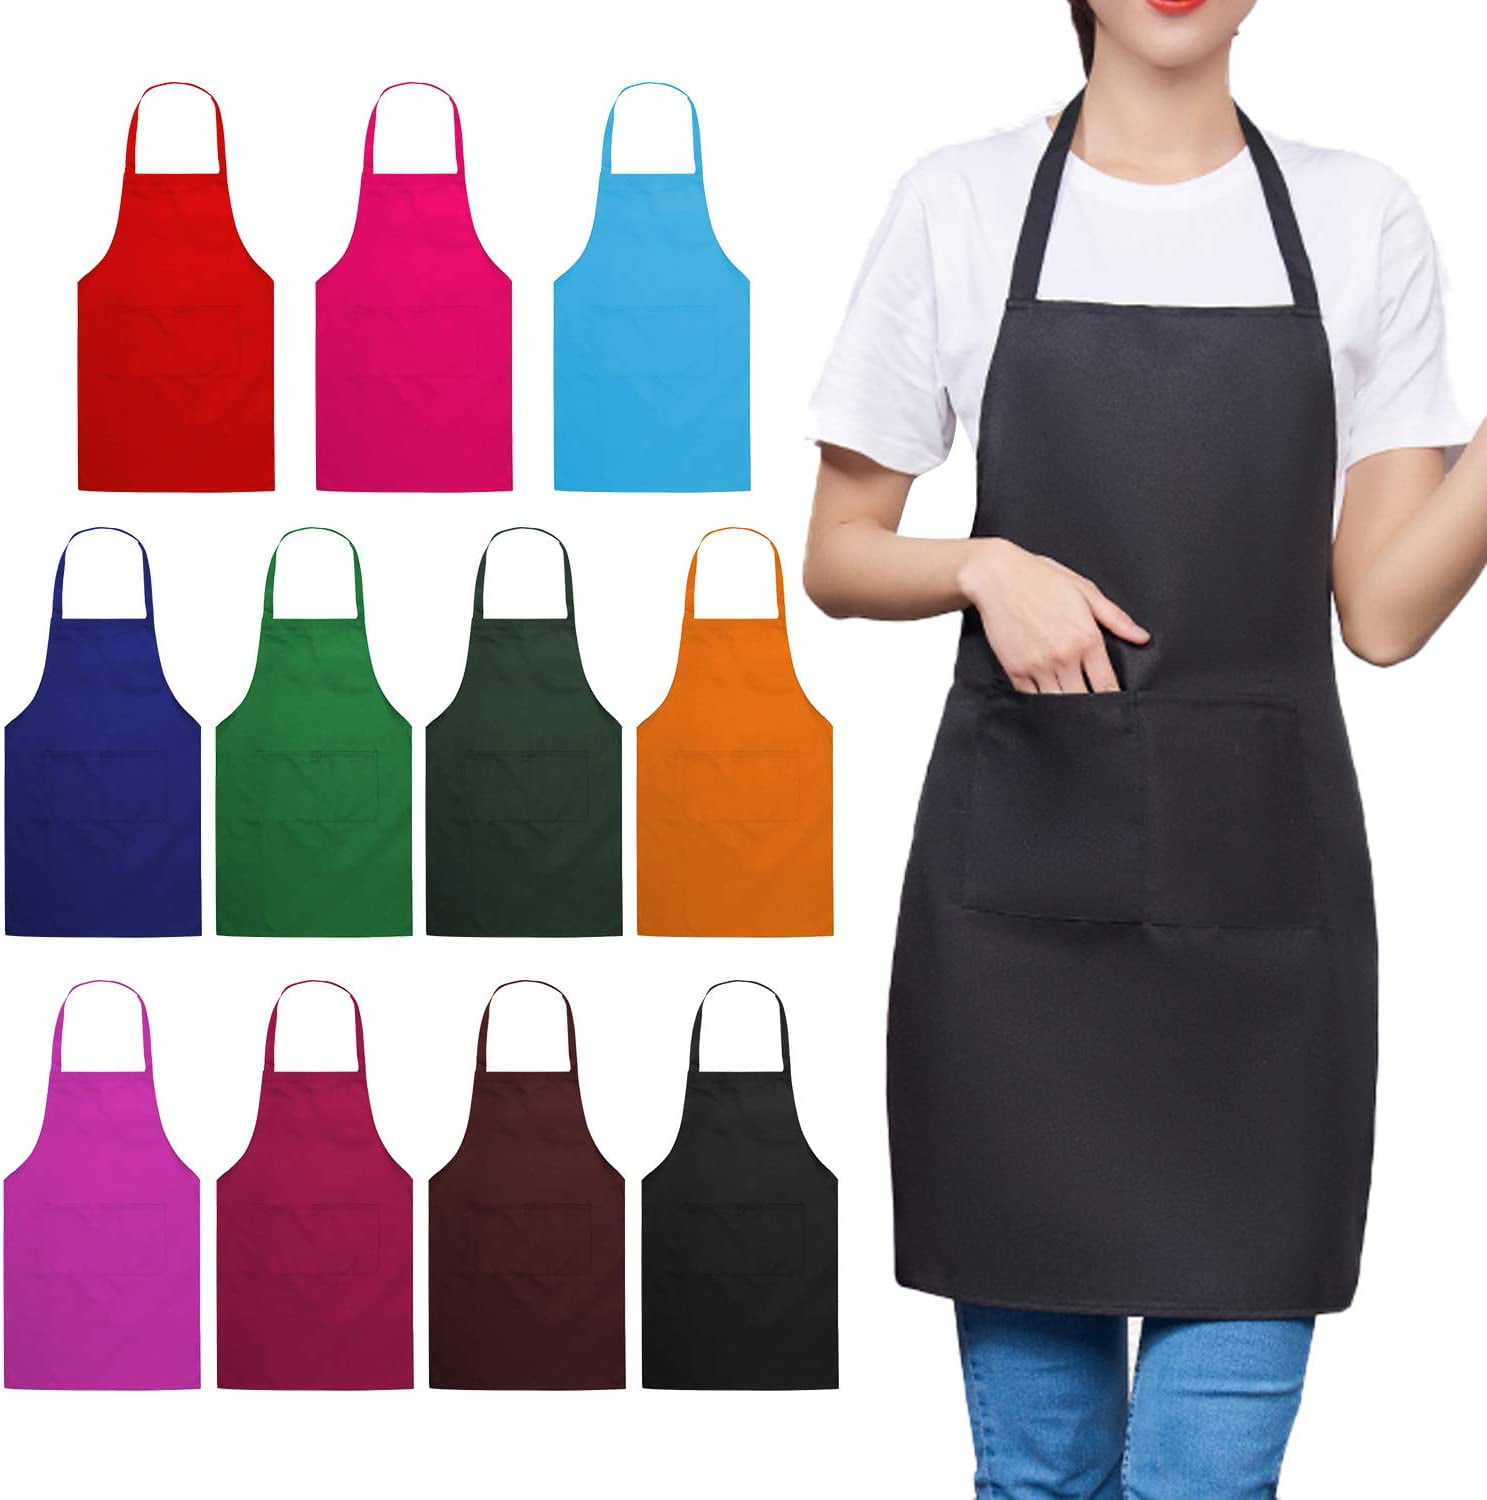 Bib Apron Adult Women Unisex for Waist size 30 to 42 Durable Comfortable with Front Pocket Washable For Cooking Baking Kitchen Restaurant crafting Medium Size Trendbox Total 11 PCS Plain Color